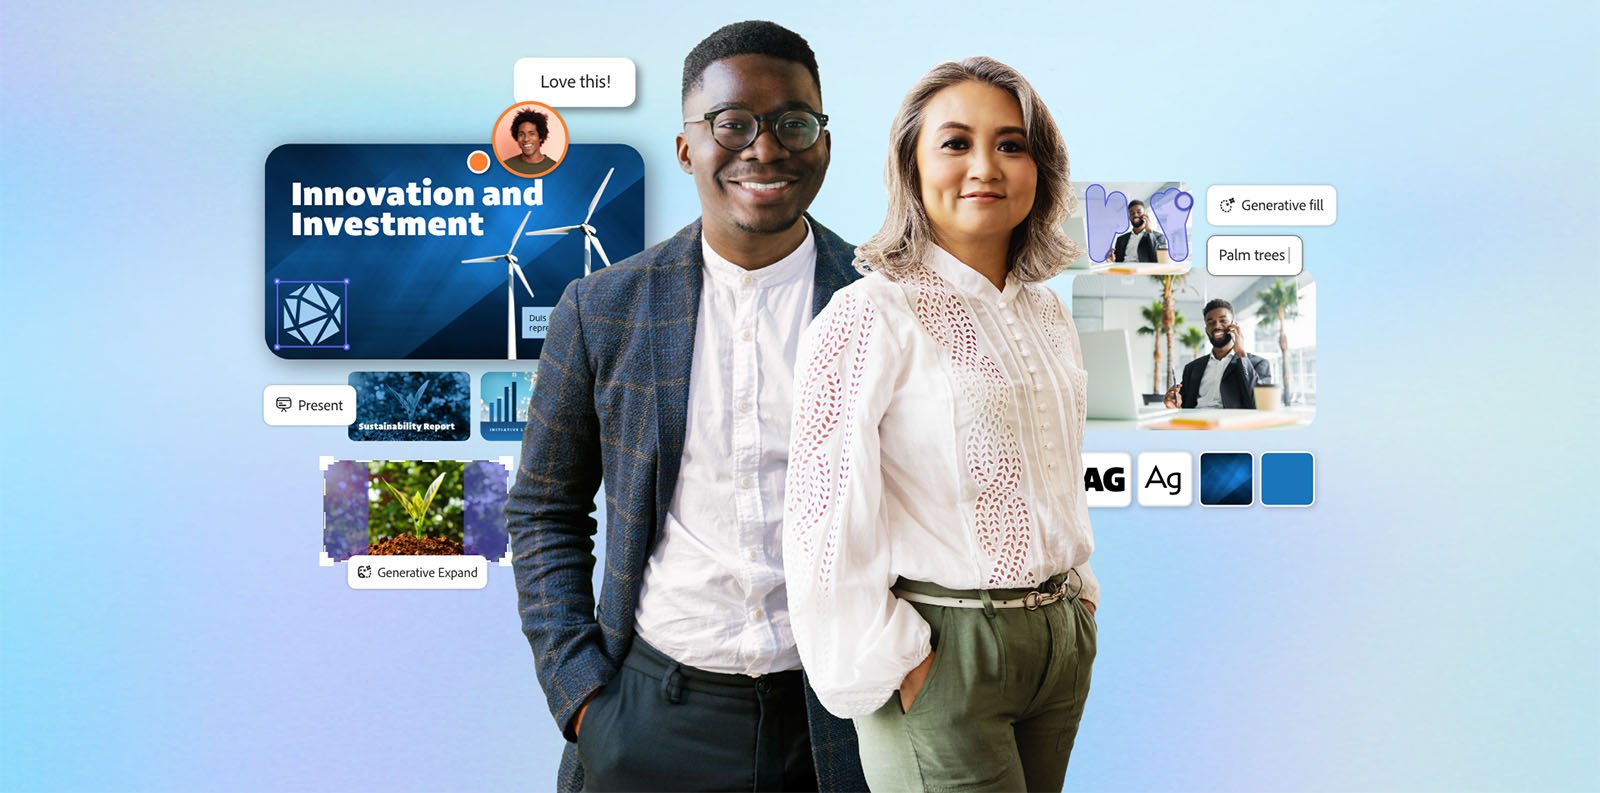 A man and a woman stand confidently, smiling in smart casual attire. Behind them are various images and icons related to innovation and investment, including wind turbines, bar charts, and a "Love this!" comment bubble. A blue gradient background sets the scene.